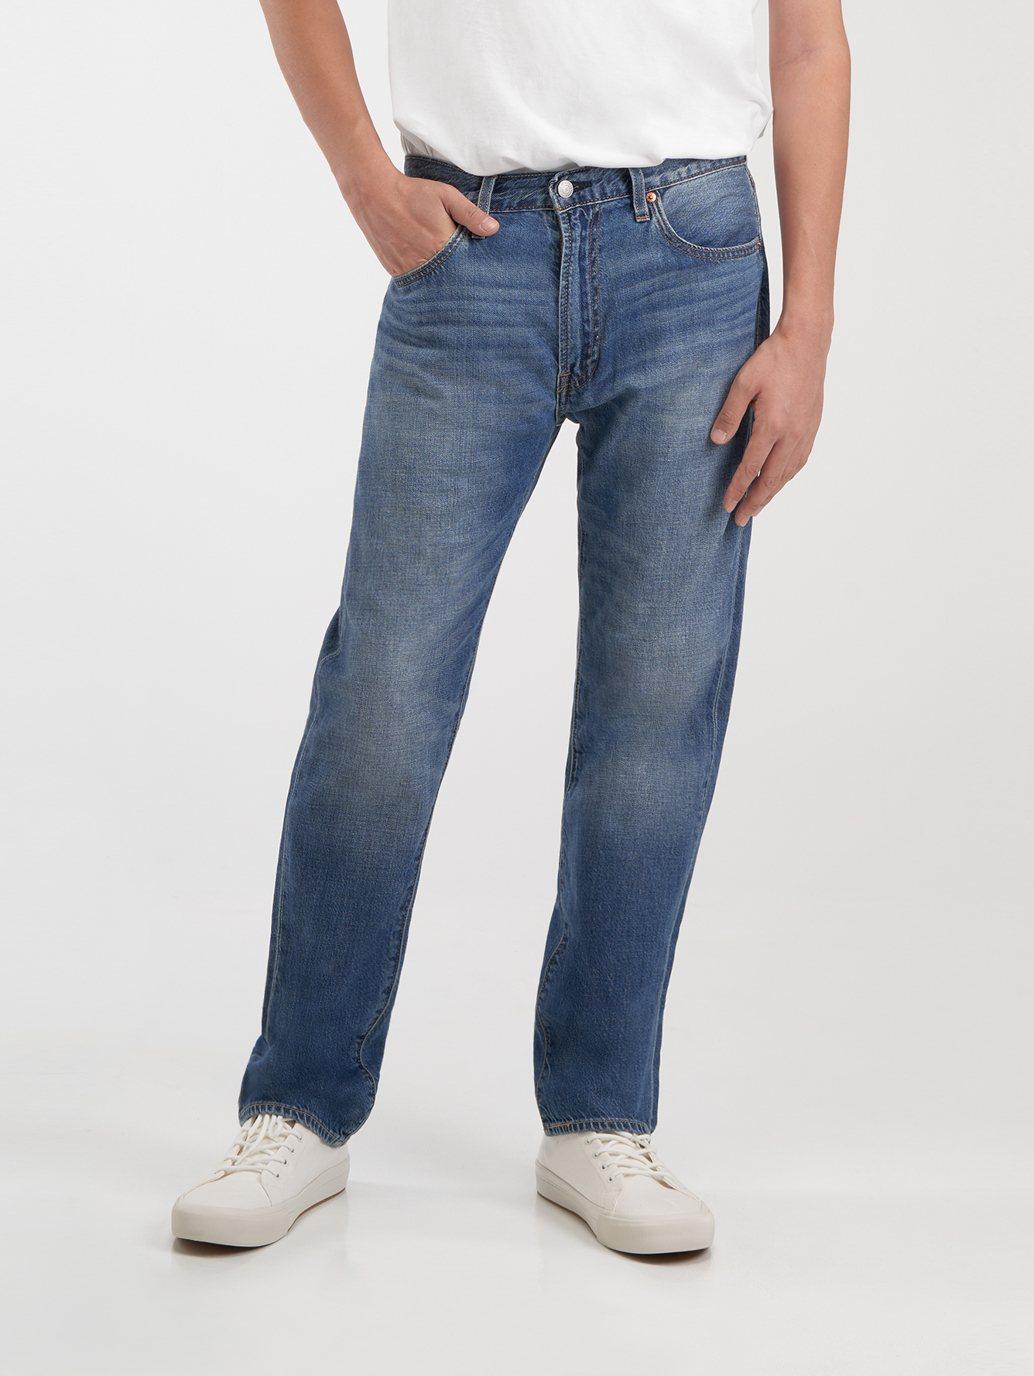 levis crossover jeans